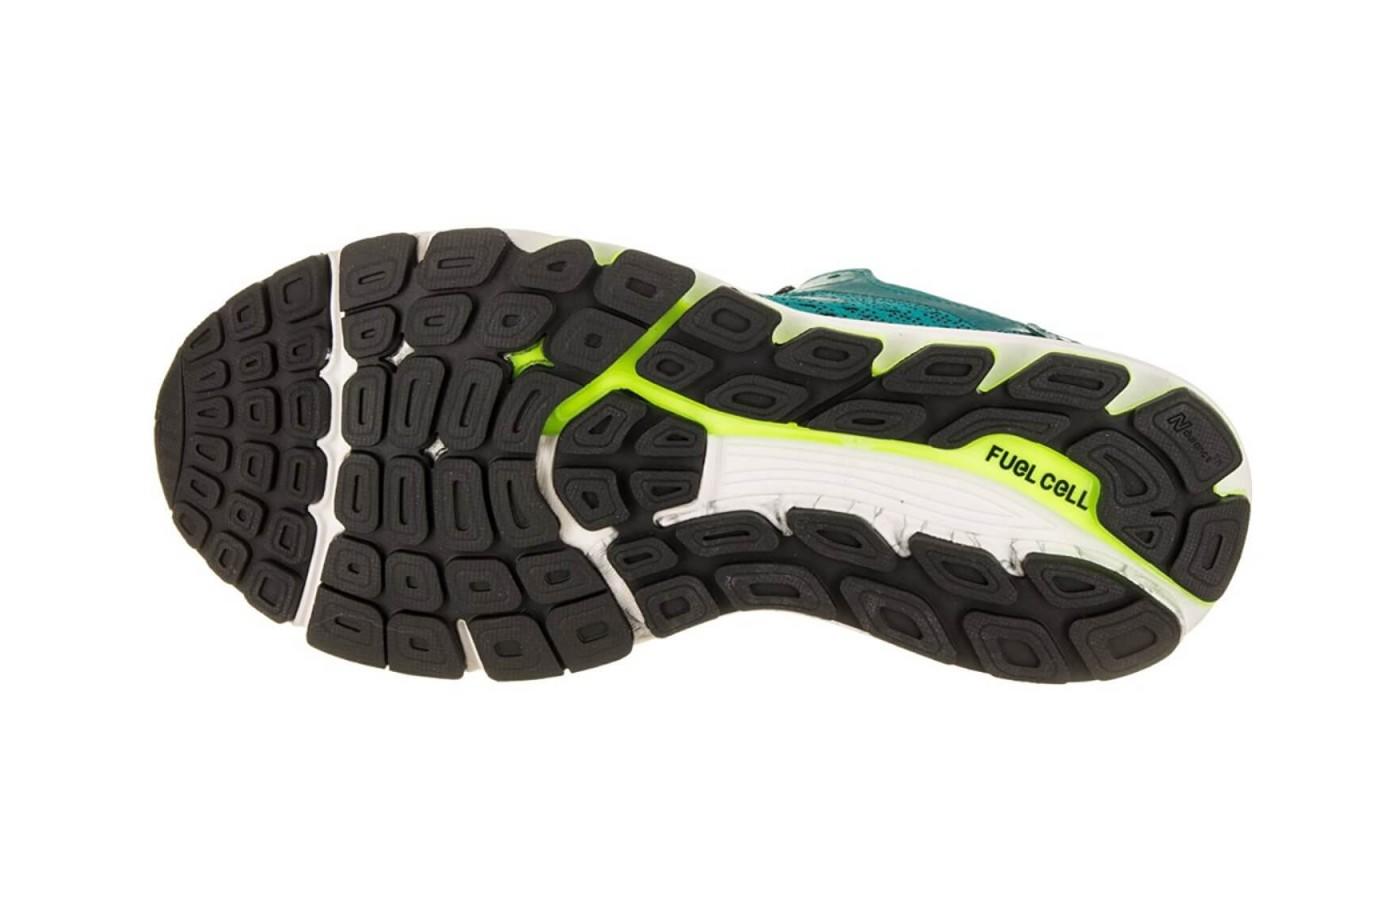 The underfoot design uses multiple rubber materials for added traction and durability. 